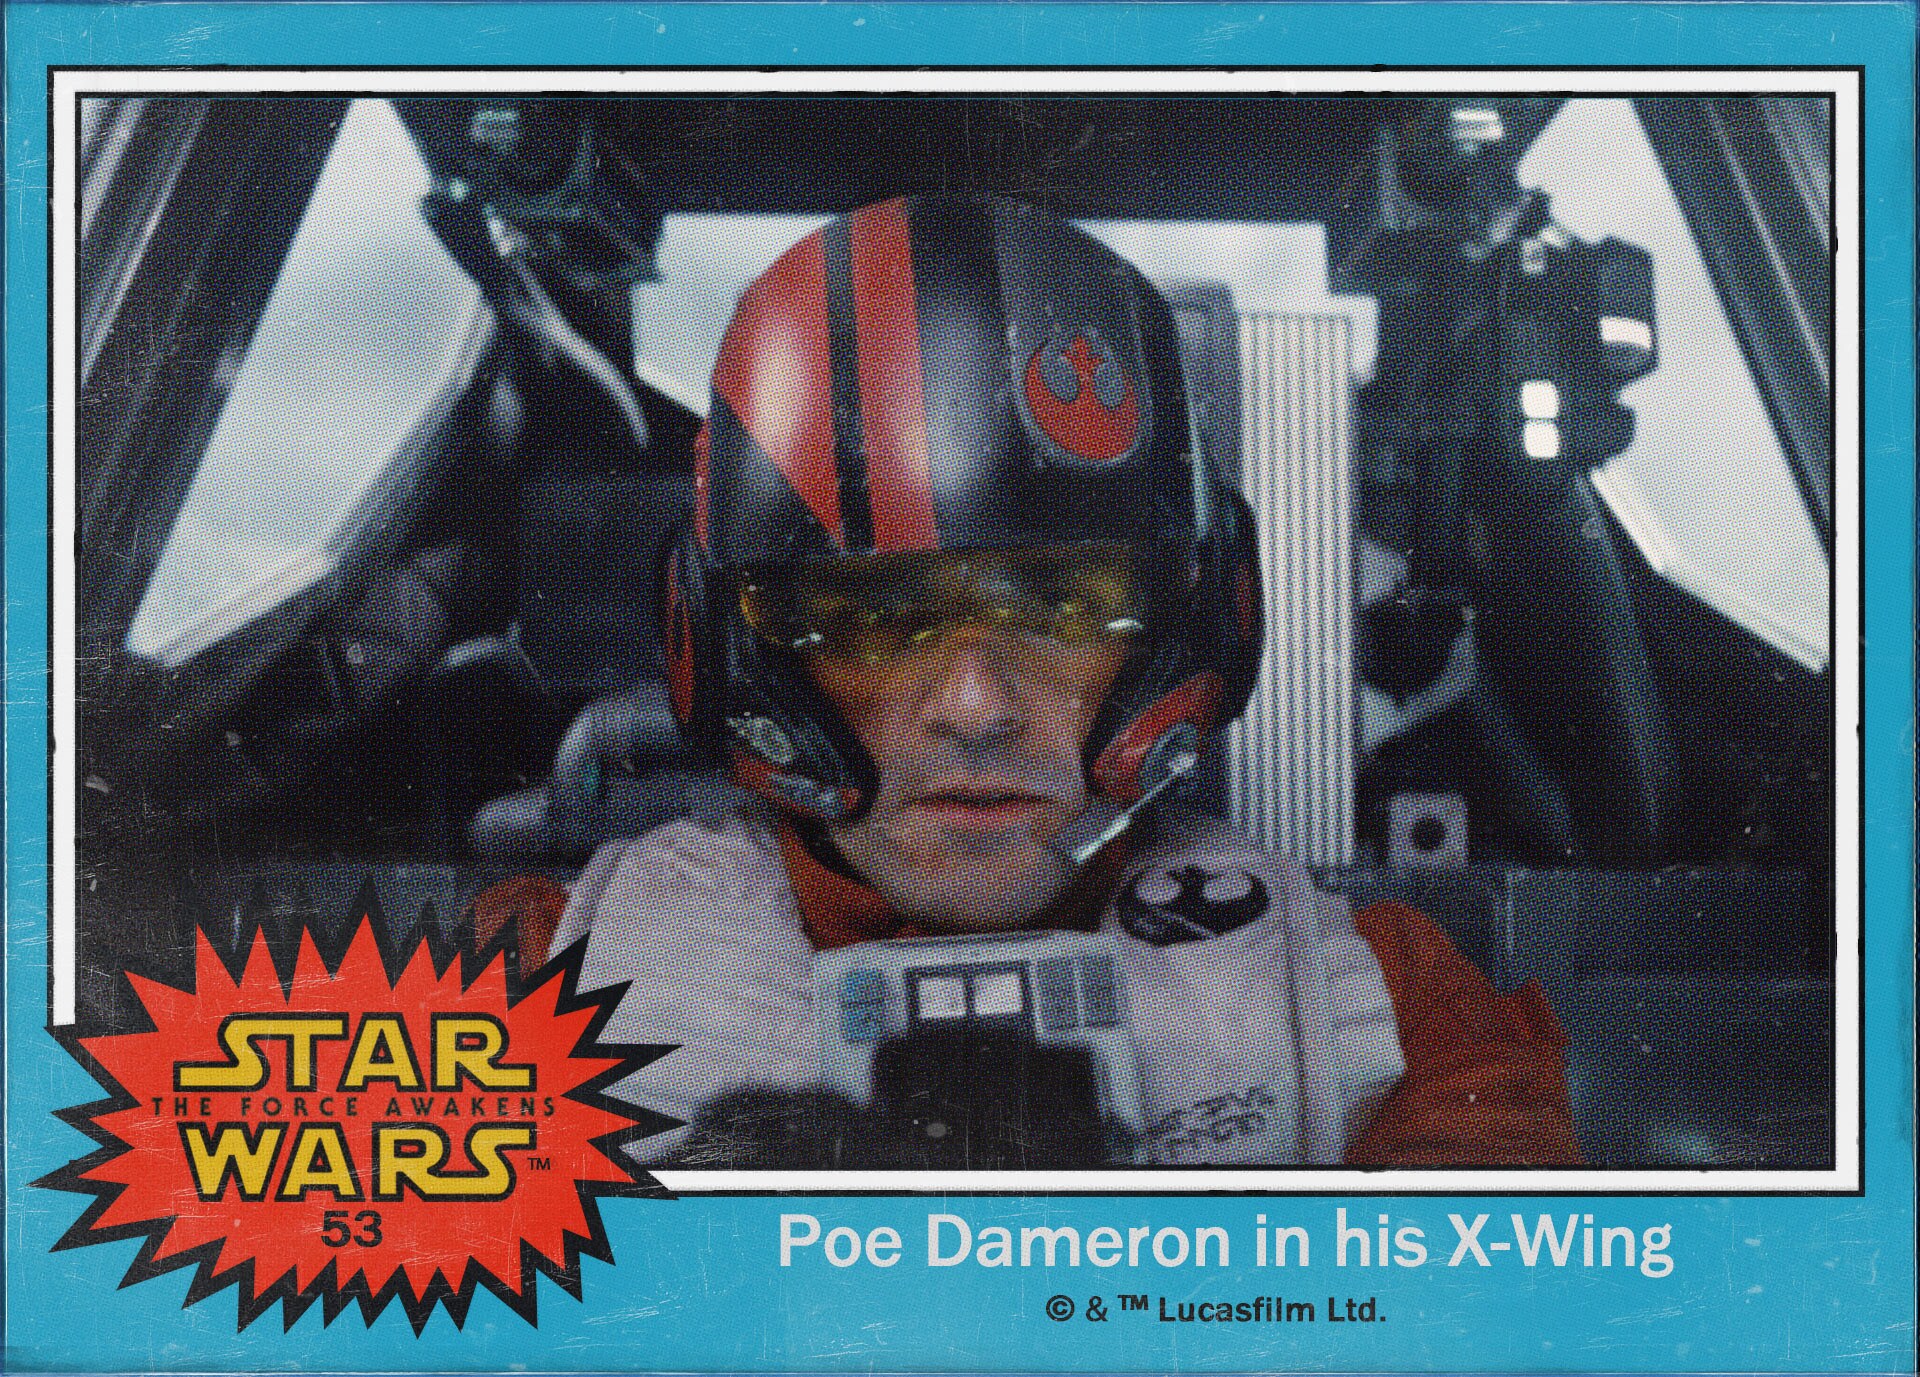 Peo Dameron in his X-wing. Star Wars: The Force Awakens Digital Trading Card #53